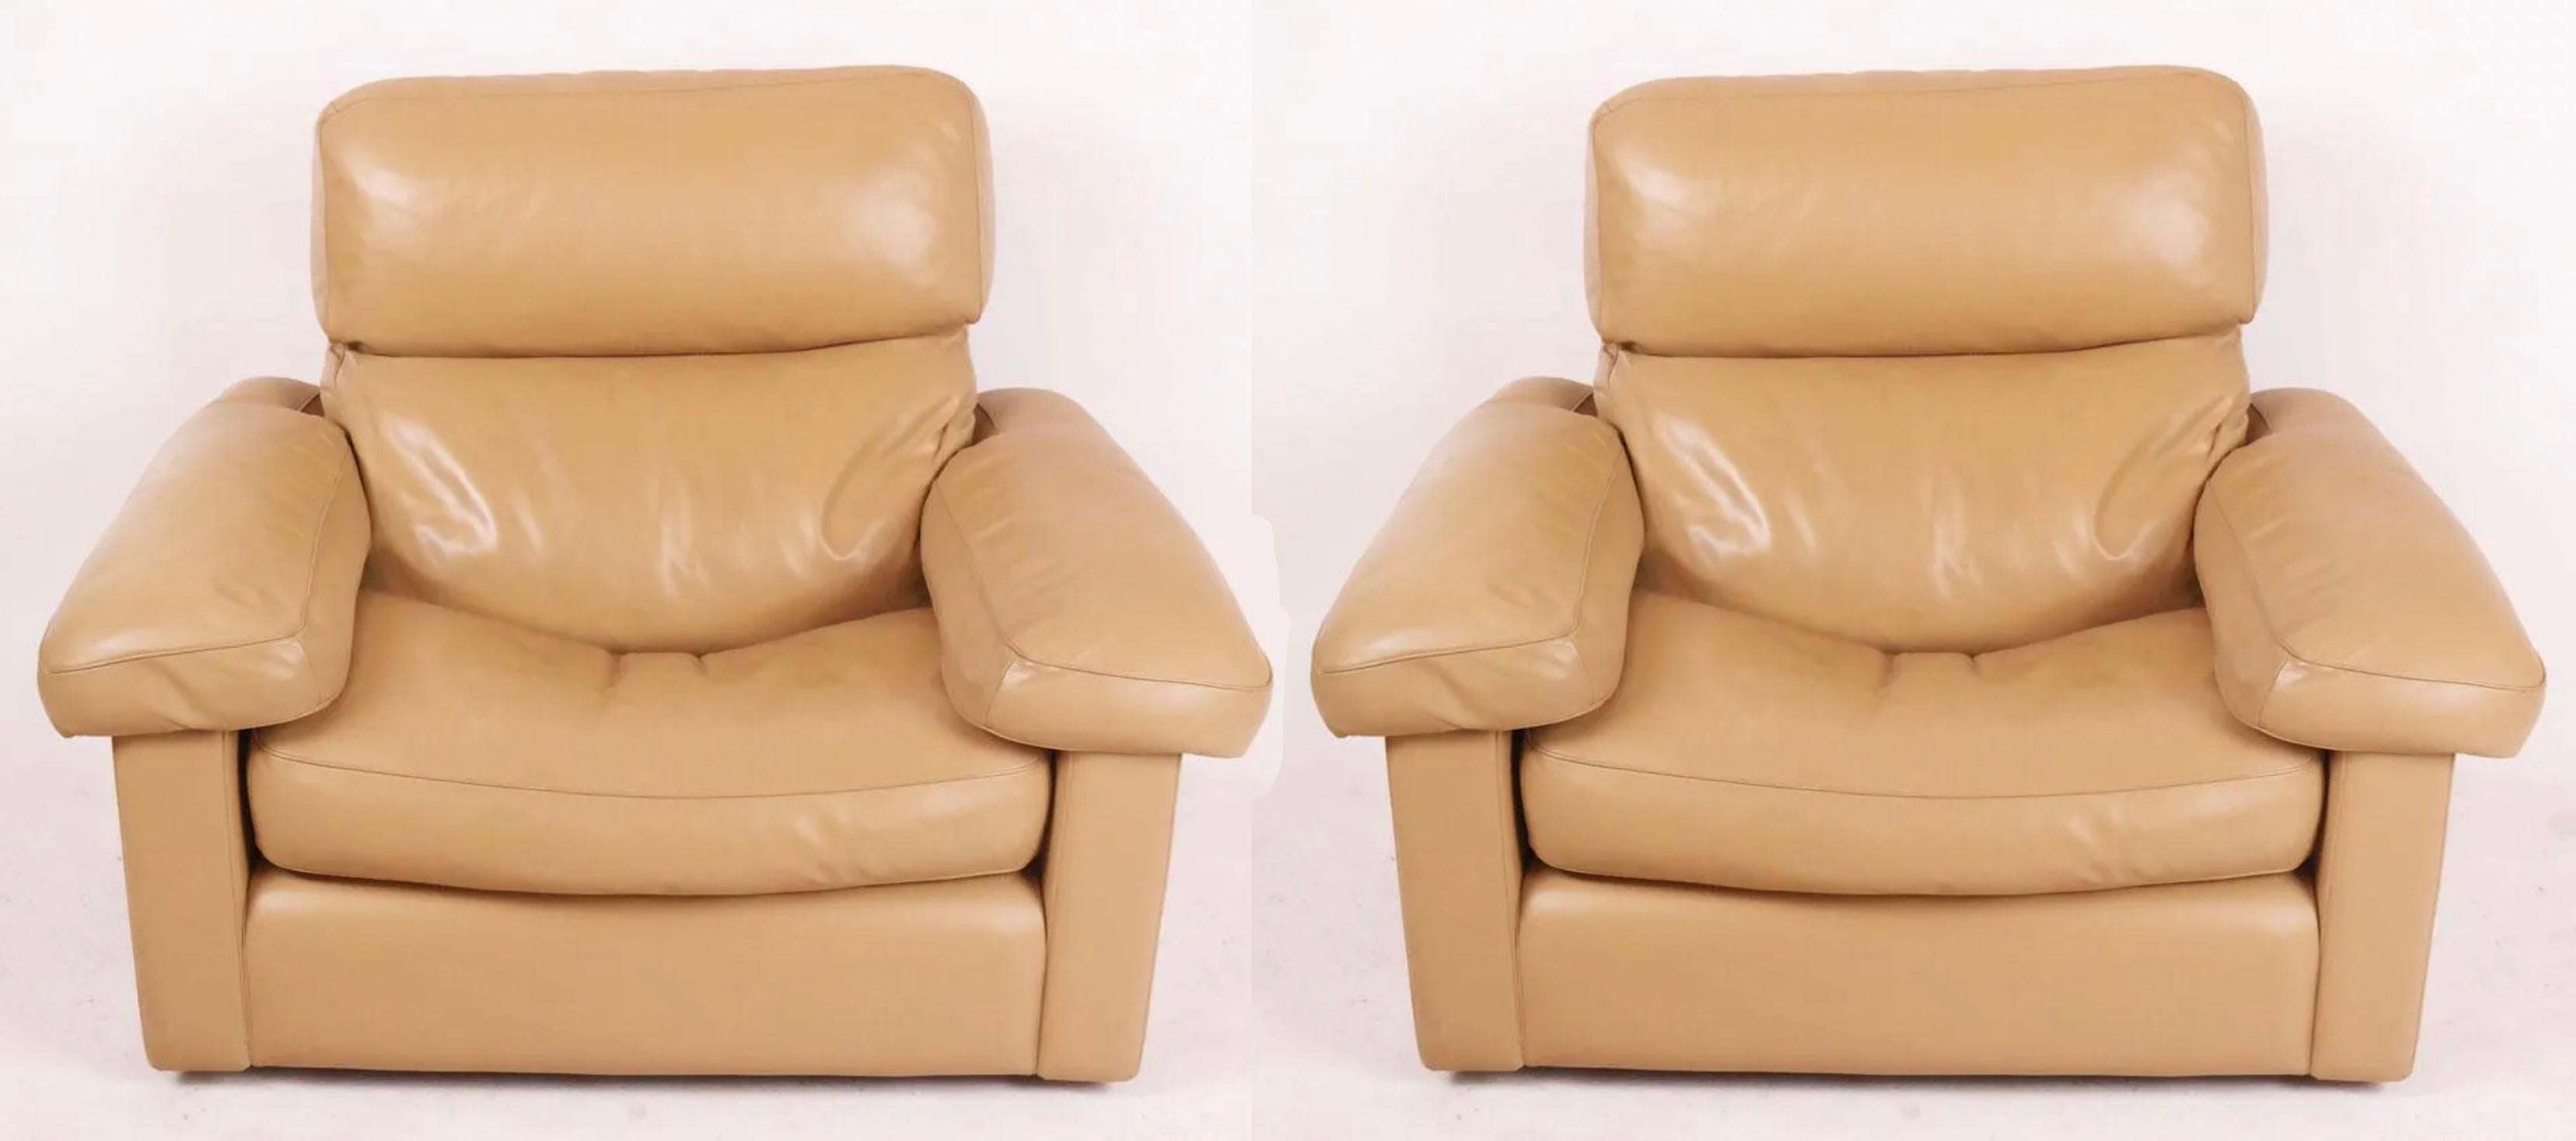 Mid-Century Modern Pair of Midcentury Tan Leather Lounge Chairs by Tito Agnoli for Poltrona Frau For Sale